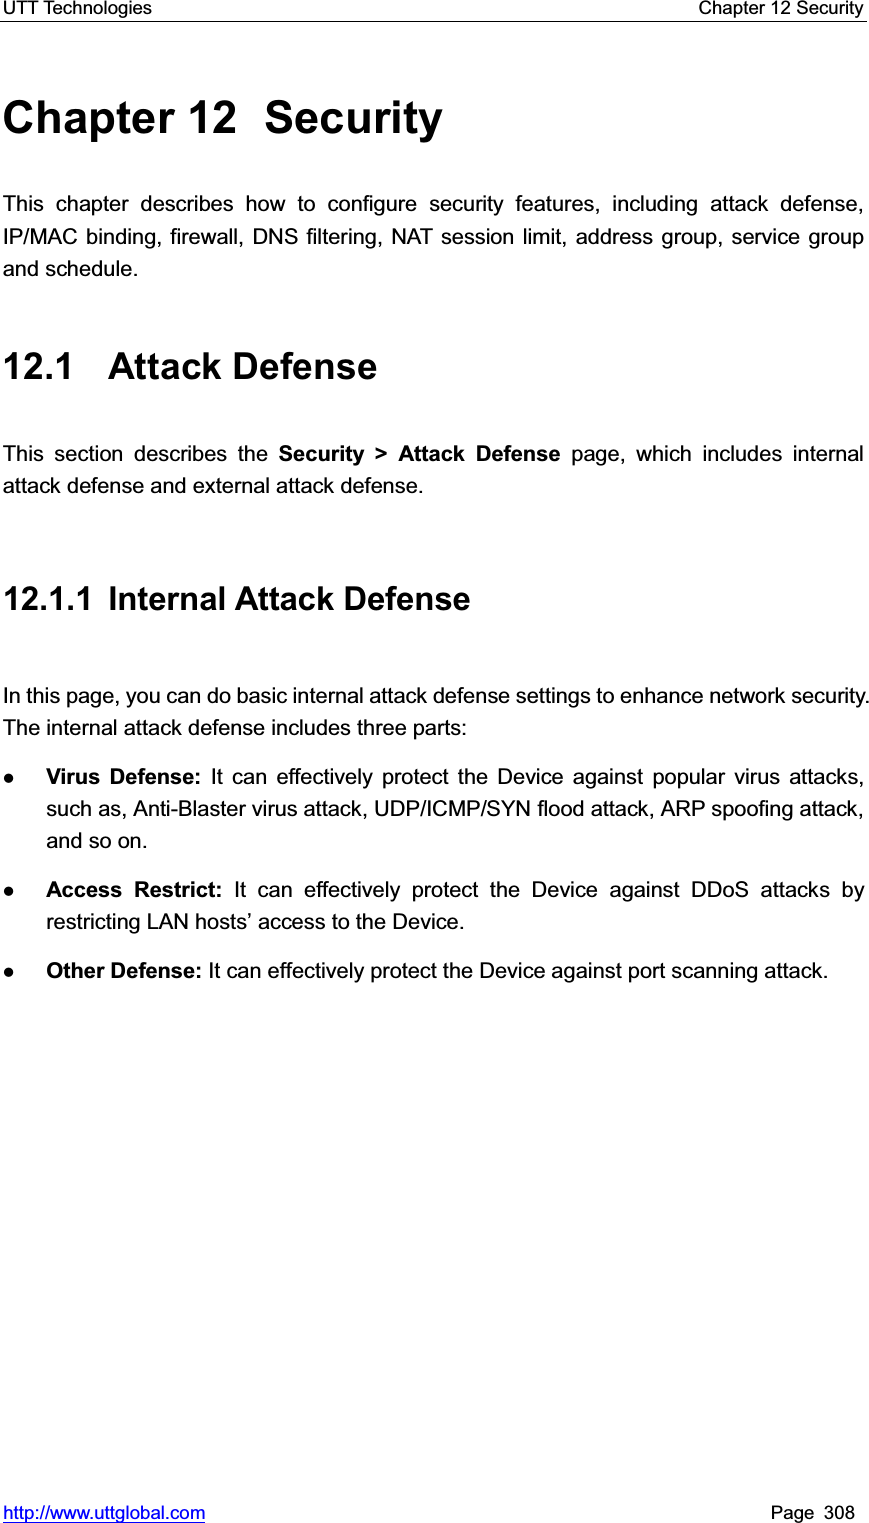 UTT Technologies    Chapter 12 Security   http://www.uttglobal.com Page 308 Chapter 12  Security This chapter describes how to configure security features, including attack defense, IP/MAC binding, firewall, DNS filtering, NAT session limit, address group, service group and schedule. 12.1 Attack Defense This section describes the Security &gt; Attack Defense page, which includes internal attack defense and external attack defense. 12.1.1 Internal Attack Defense In this page, you can do basic internal attack defense settings to enhance network security. The internal attack defense includes three parts:   zVirus Defense: It can effectively protect the Device against popular virus attacks, such as, Anti-Blaster virus attack, UDP/ICMP/SYN flood attack, ARP spoofing attack, and so on. zAccess Restrict: It can effectively protect the Device against DDoS attacks by restricting /$1KRVWV¶DFFHVVto the Device. zOther Defense: It can effectively protect the Device against port scanning attack. 